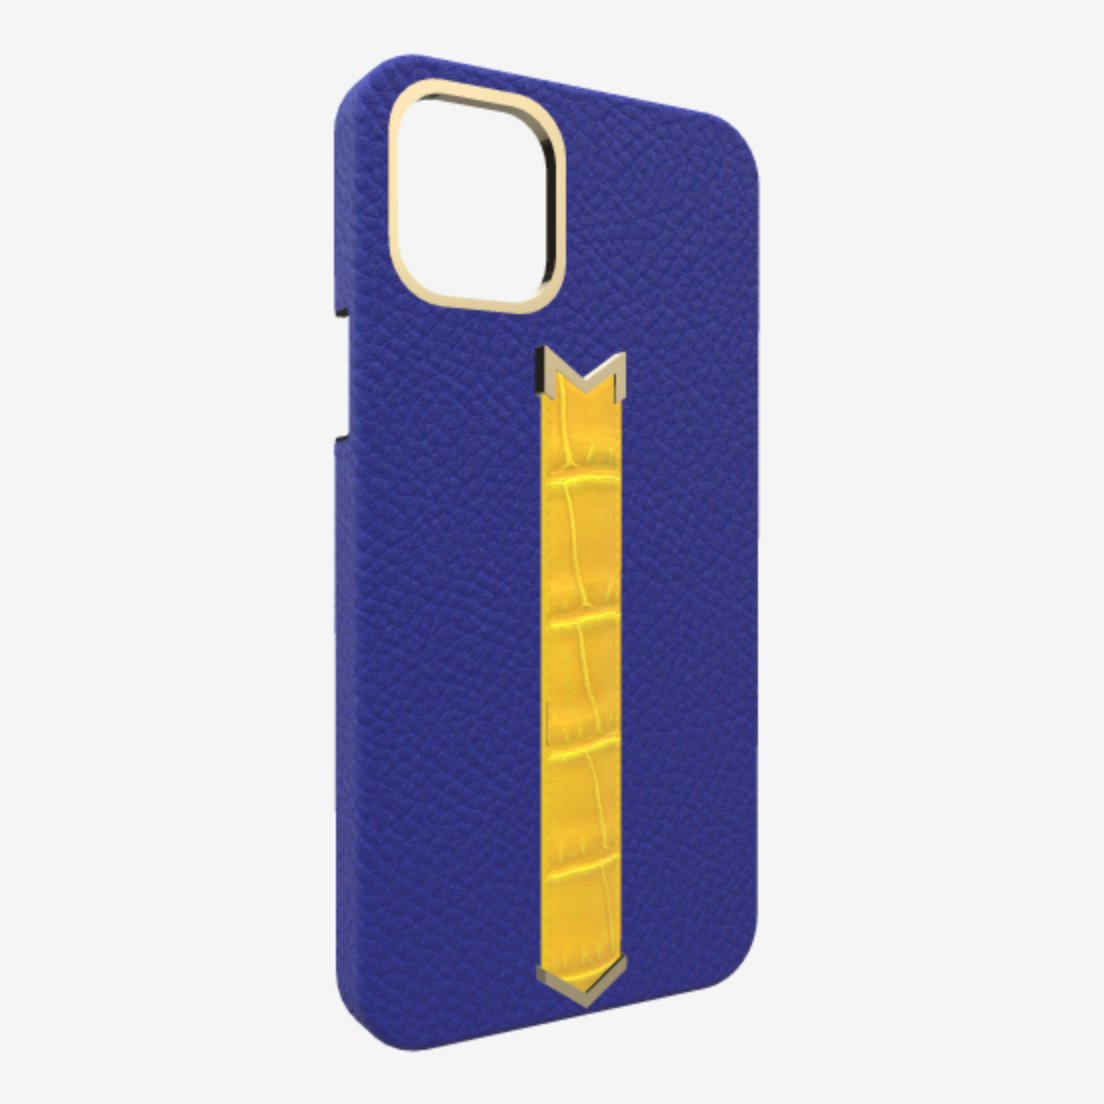 Gold Finger Strap Case for iPhone 13 Pro Max in Genuine Calfskin and Alligator Electric Blue Summer Yellow 